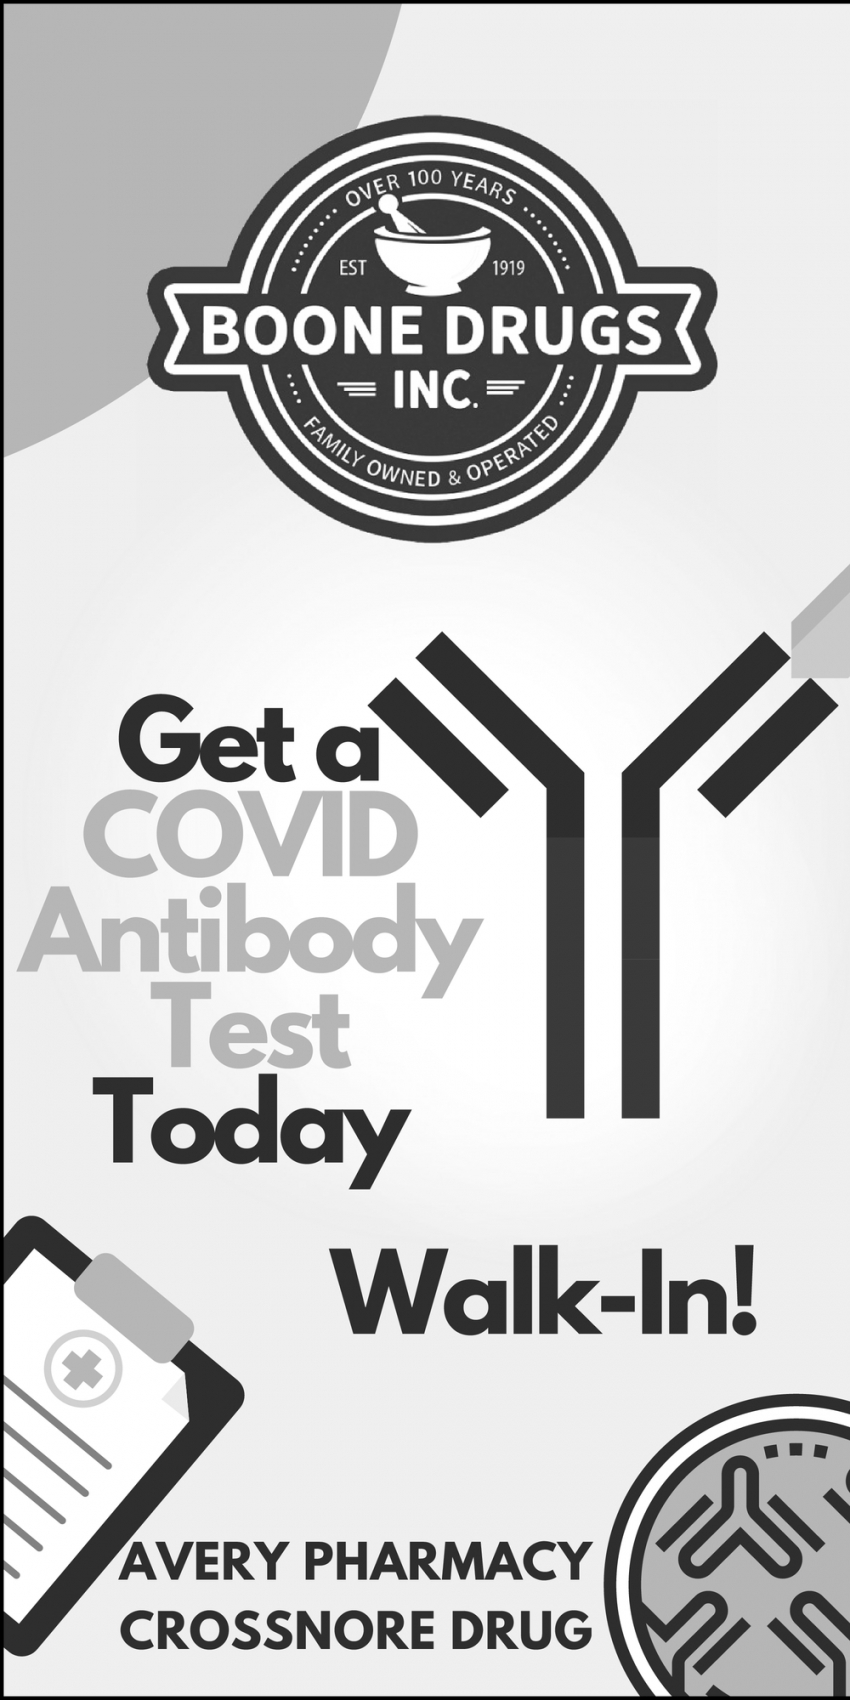 Get a COVID Antibody Test Today